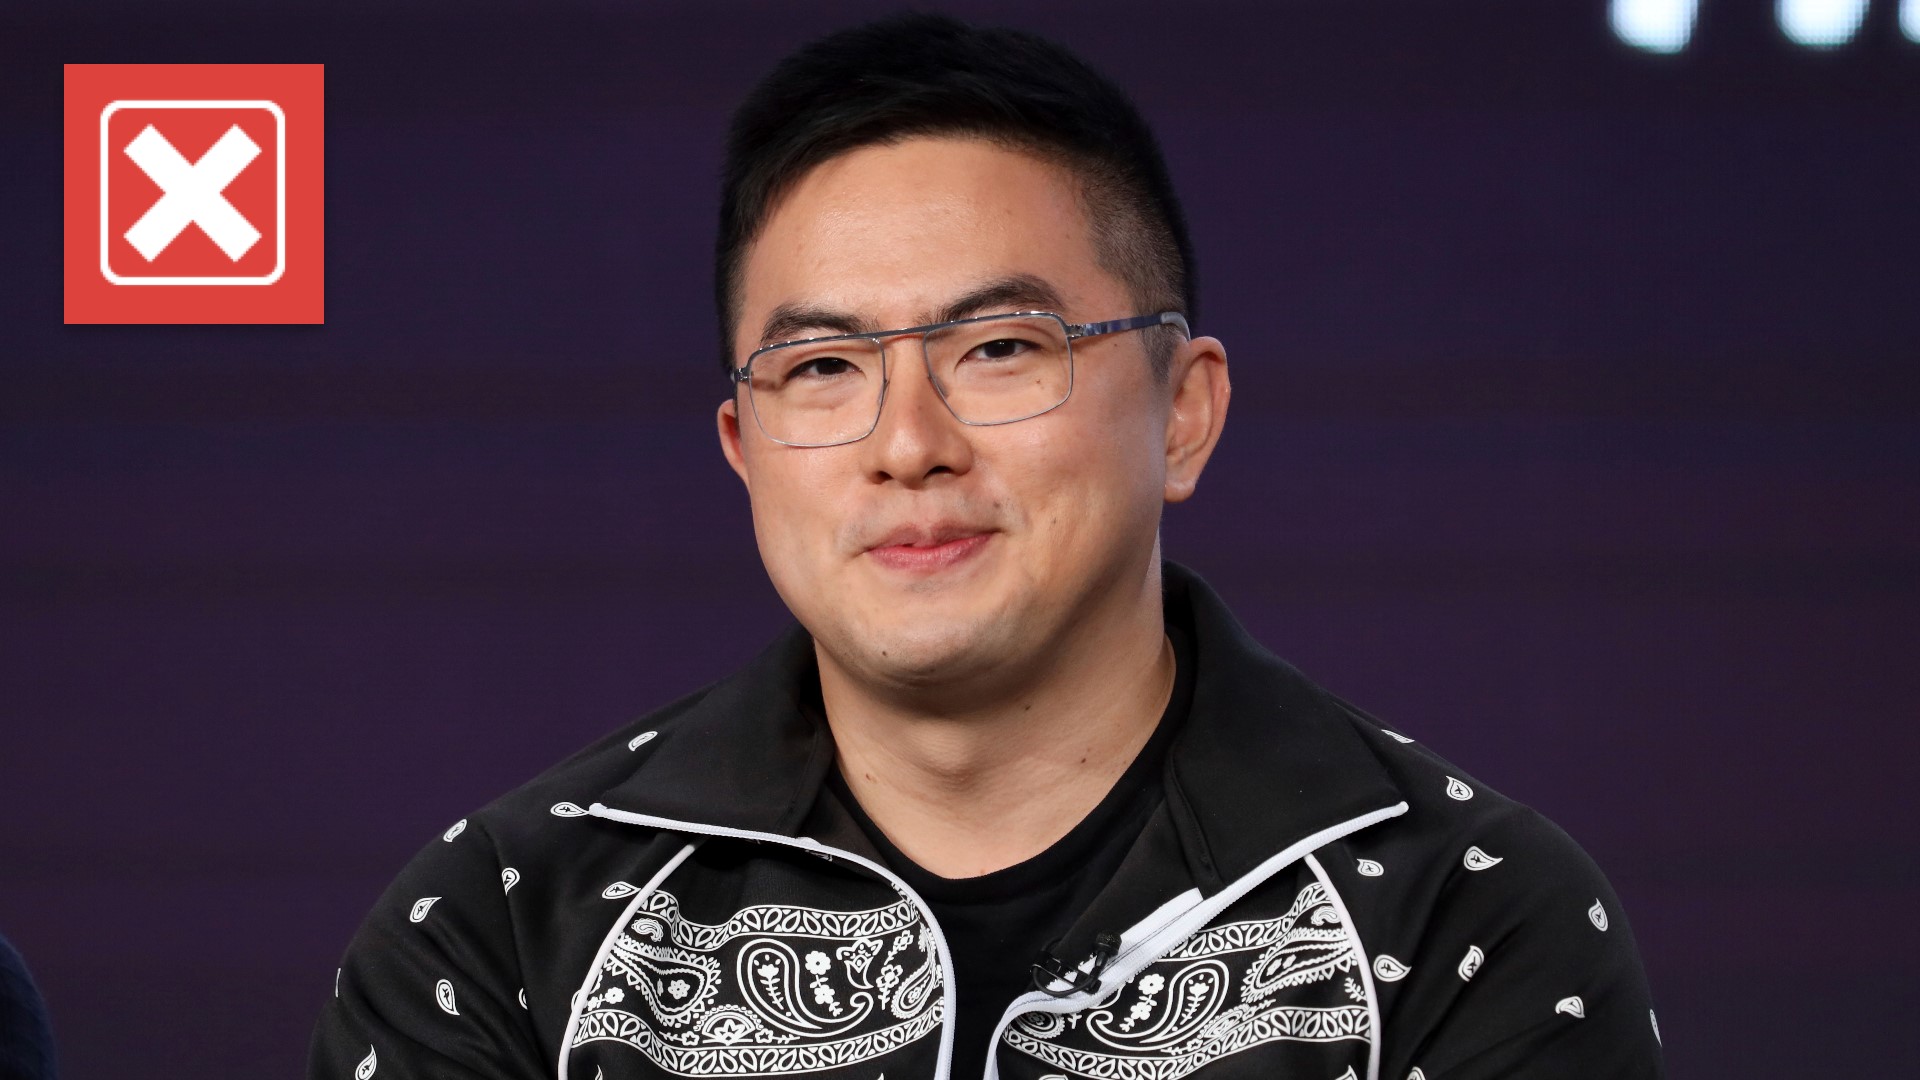 Yang isn’t the first Chinese American nominated for an Emmy, but he is the first Chinese American man to be nominated for a best supporting actor in a comedy.